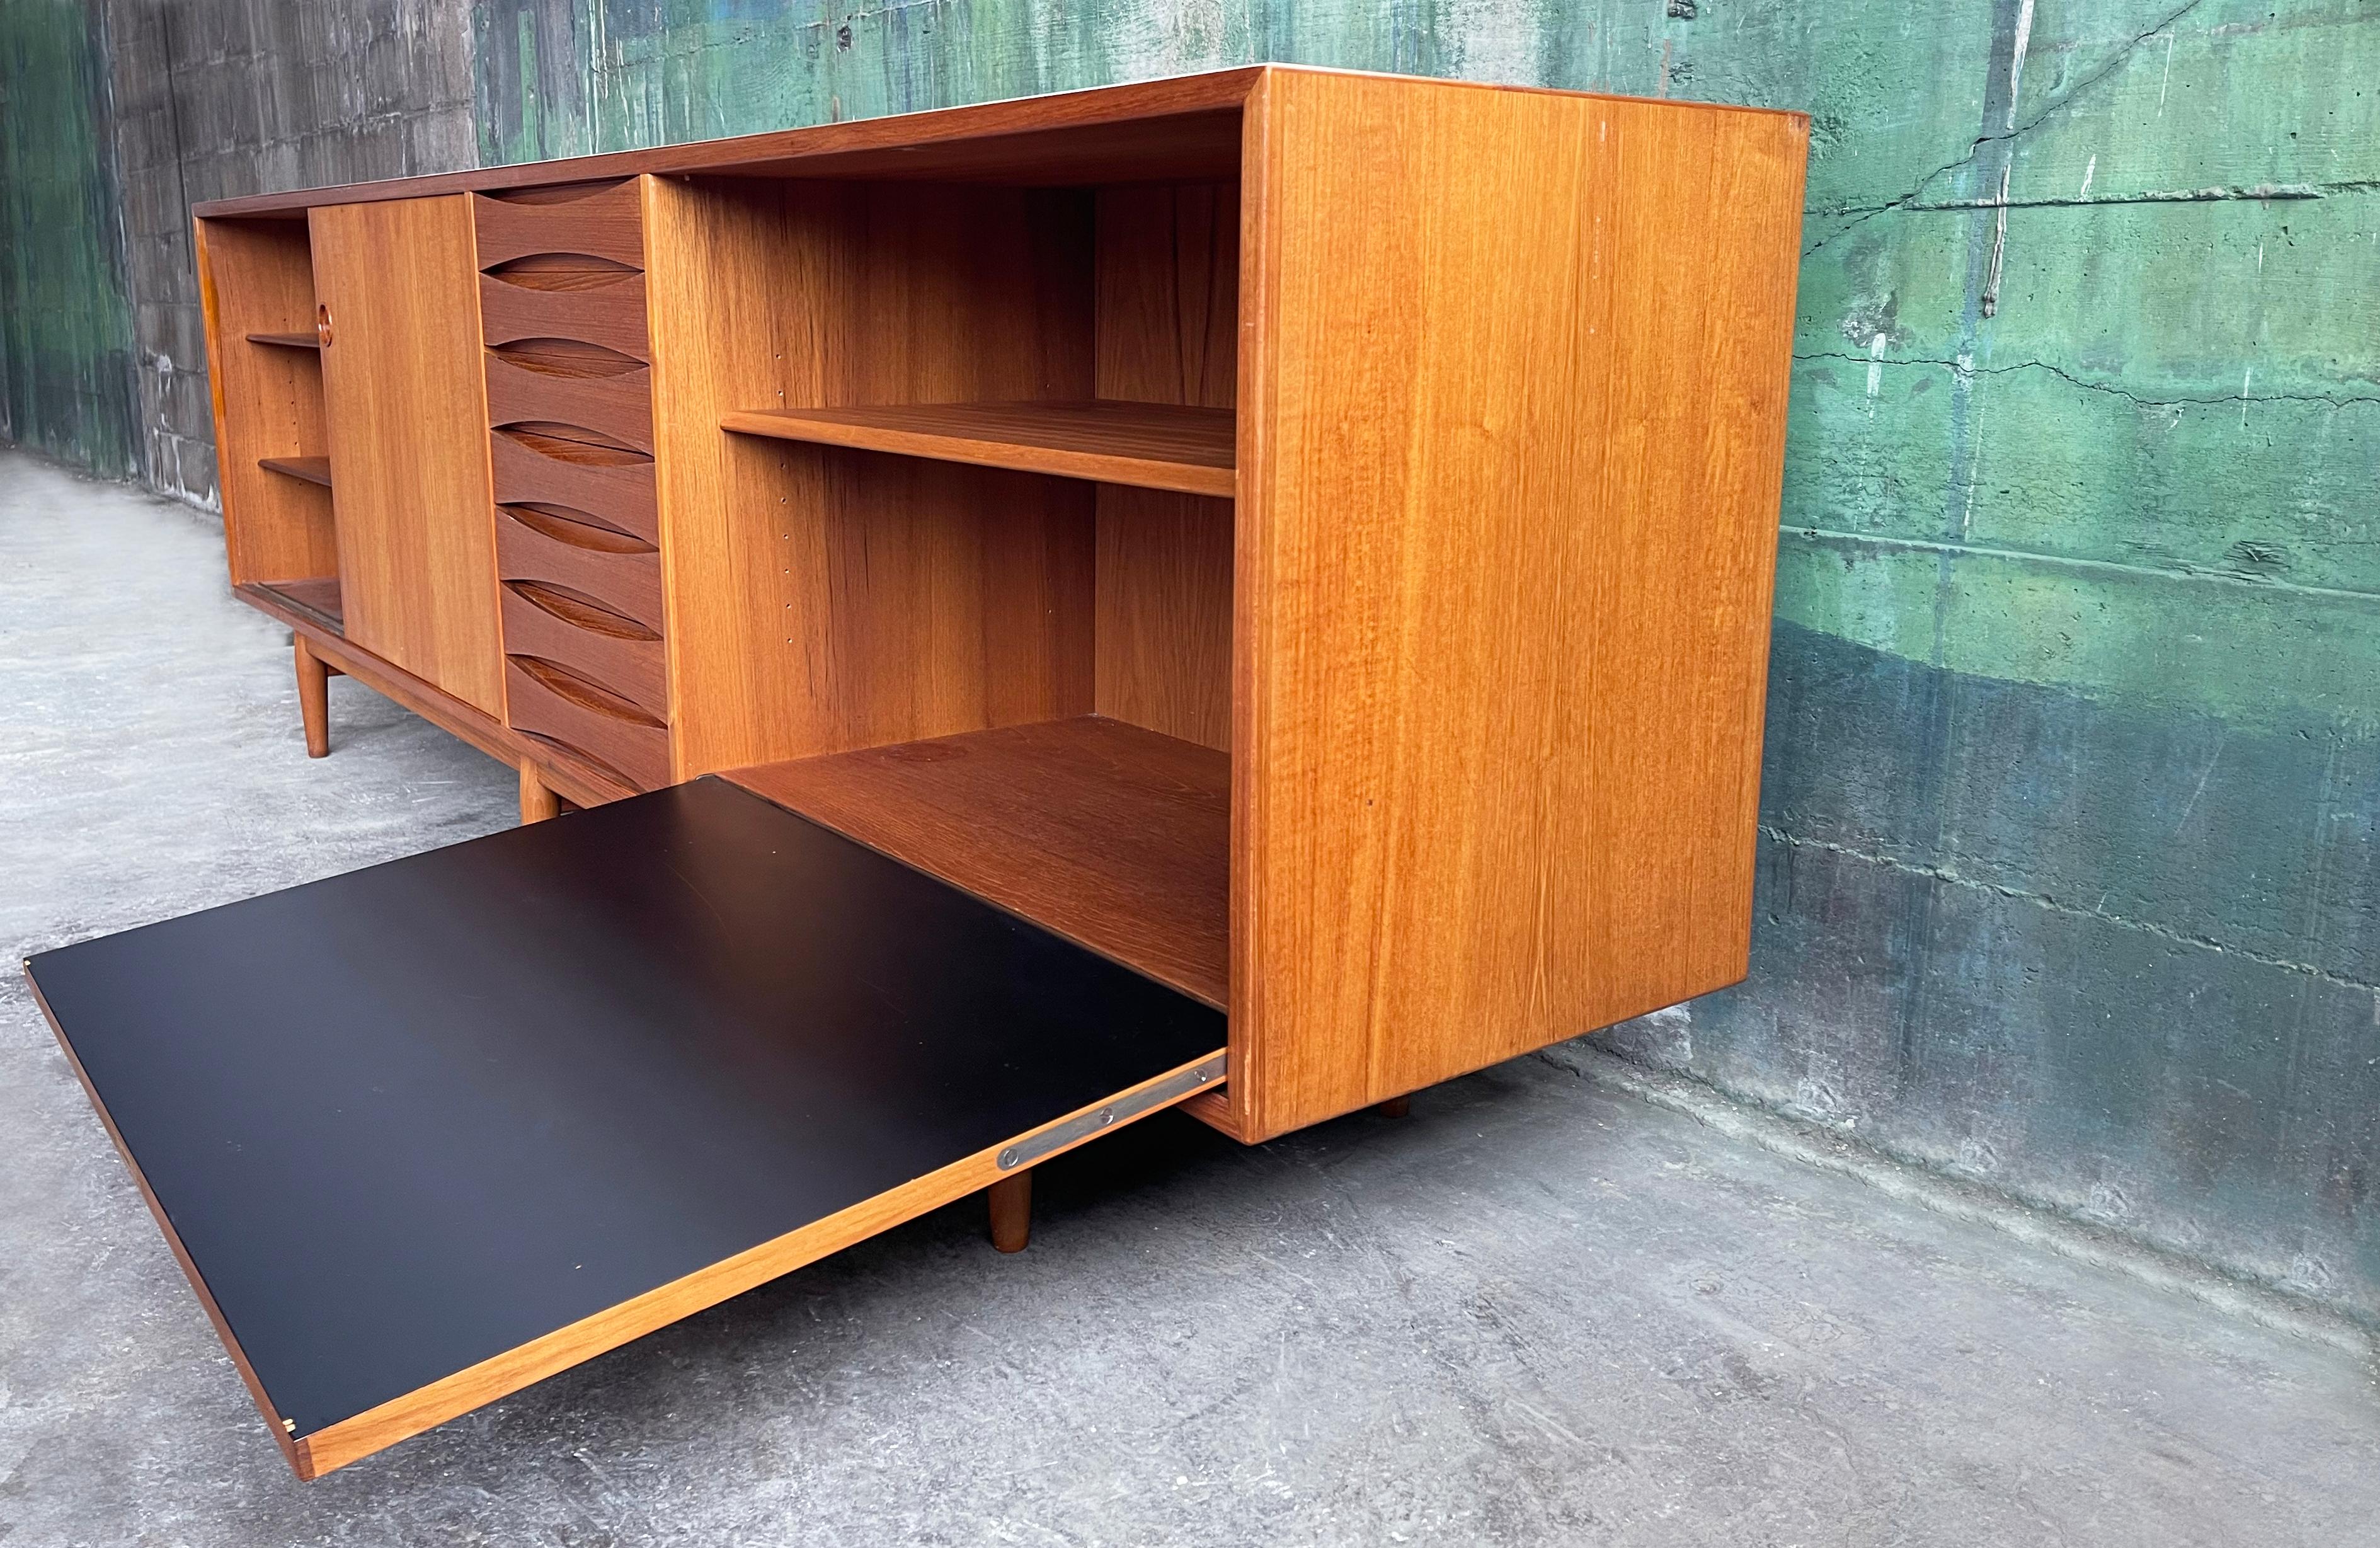 Mid-20th Century Arne Vodder Sideboard Credenza Model 29a, Produced by Sibast, 1950s Denmark For Sale